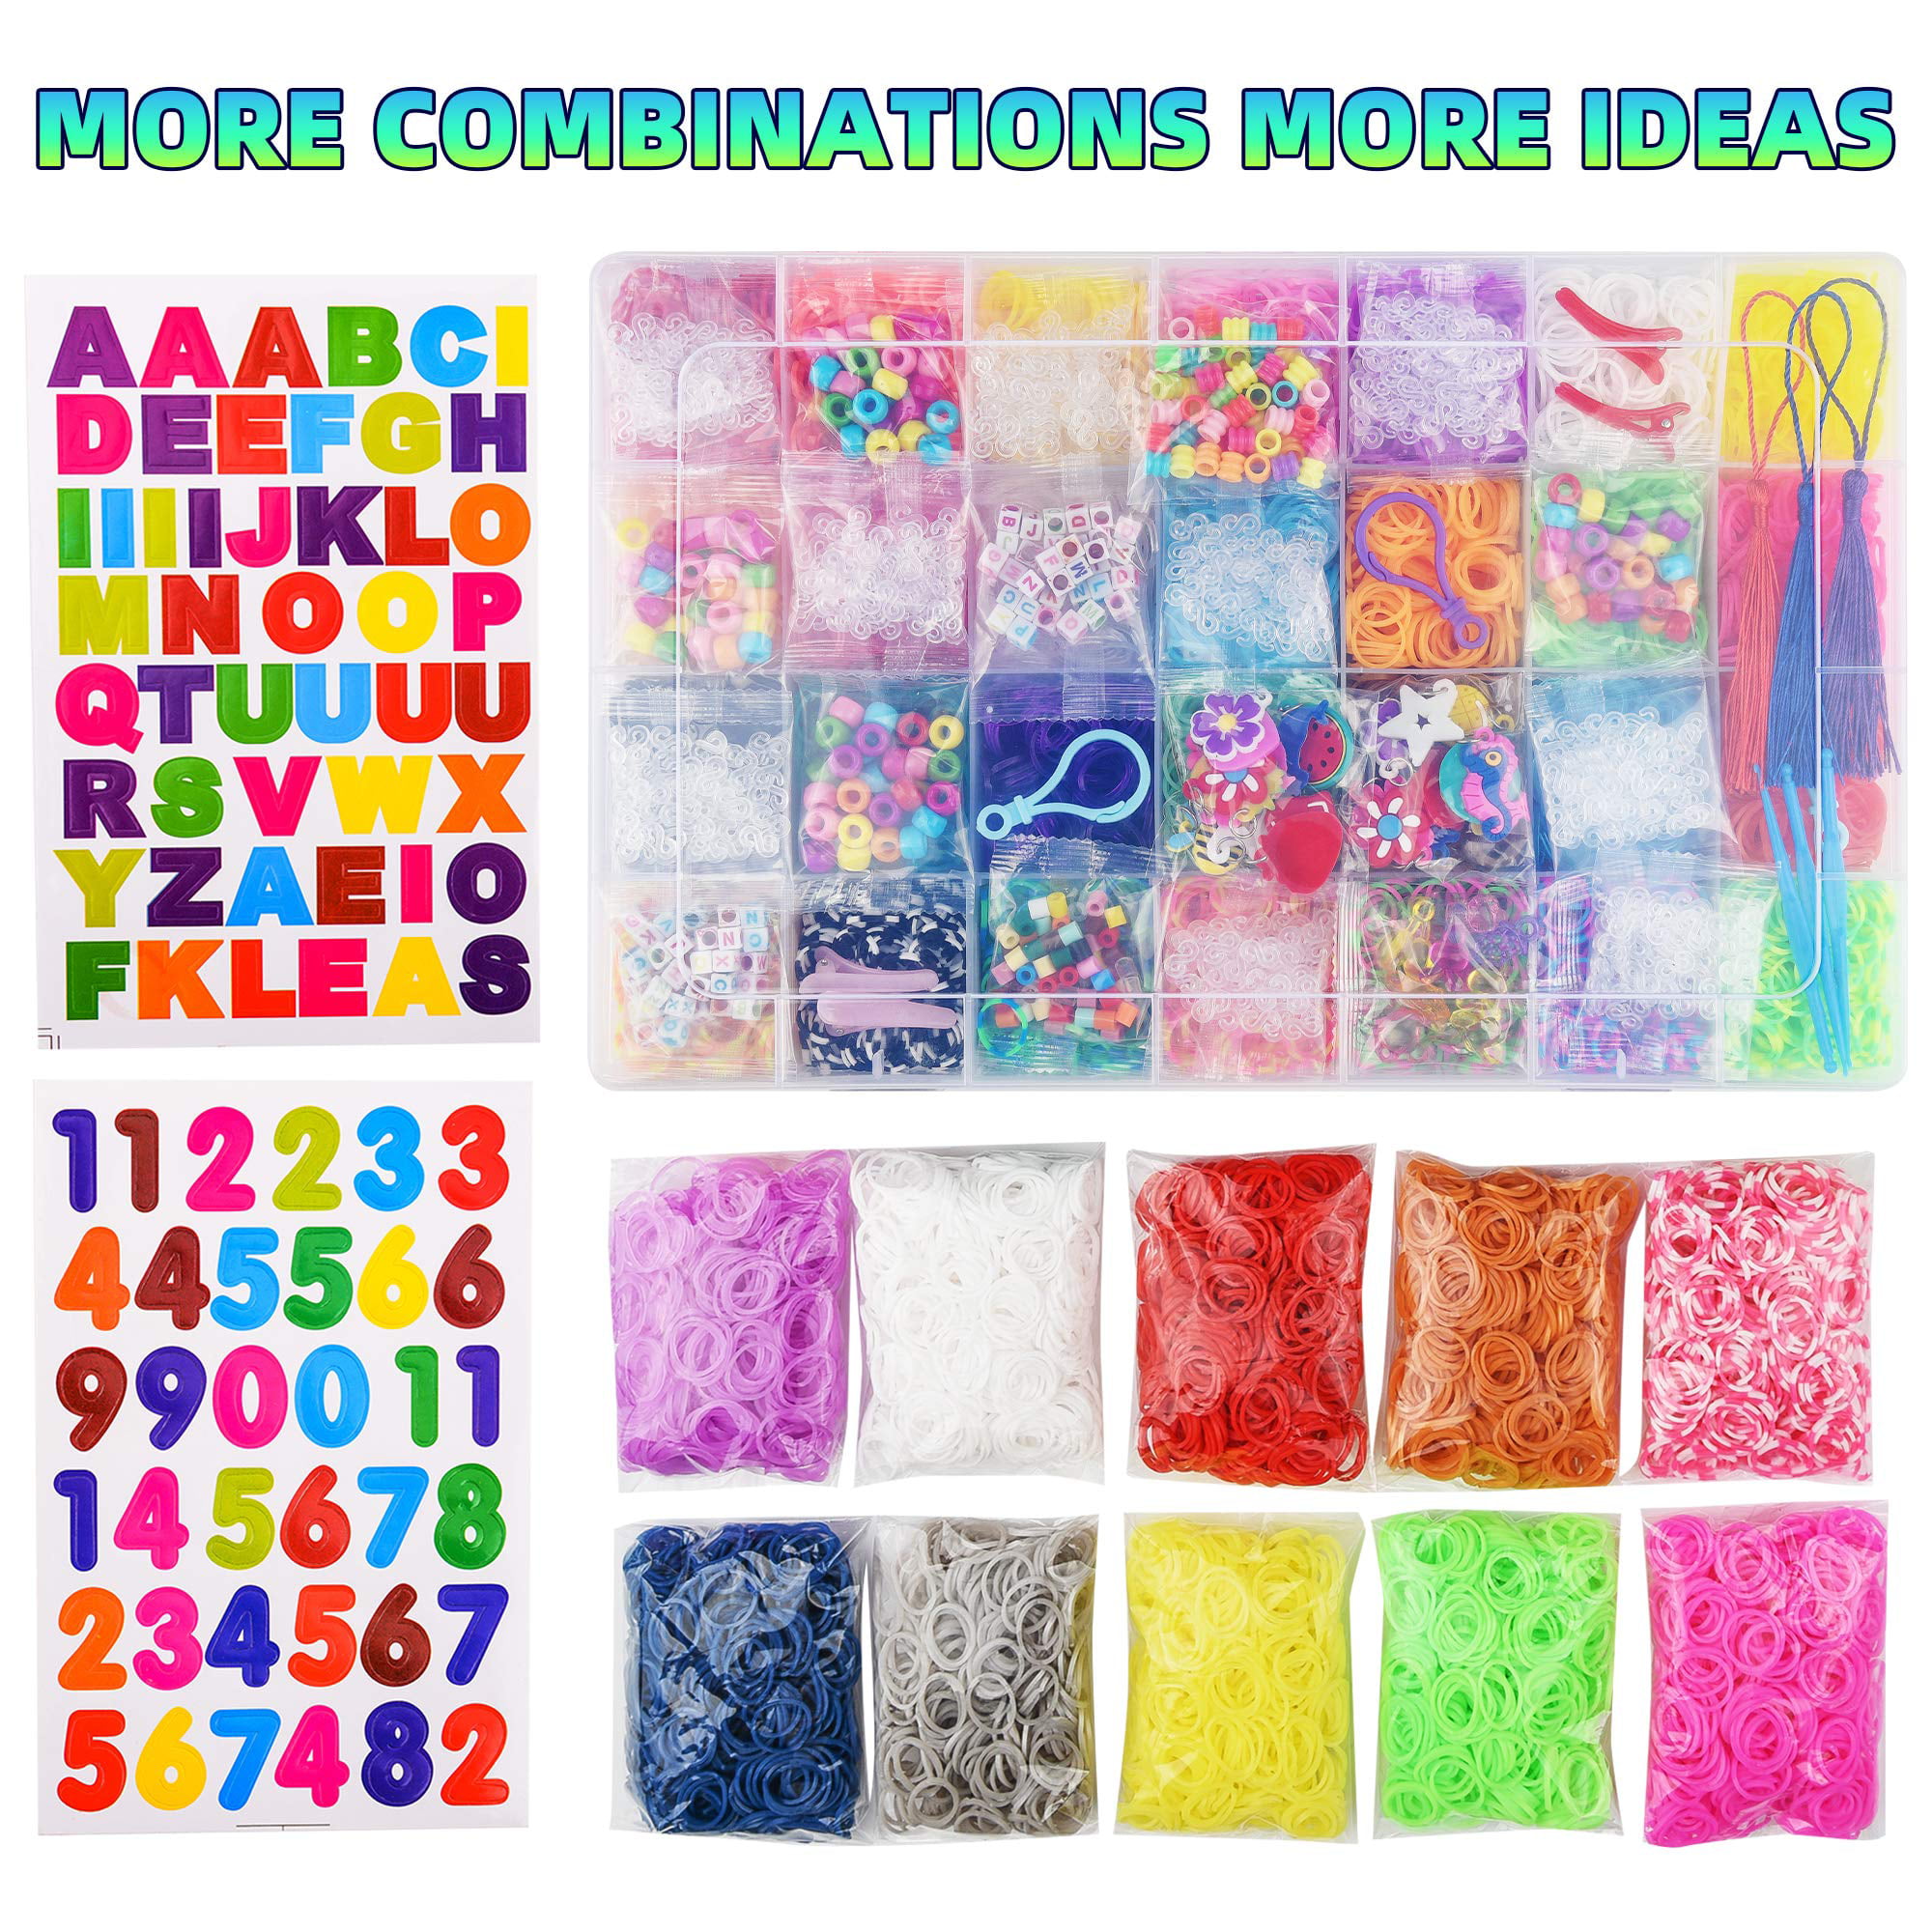 Bluedot Trading 6000 Piece Multi-Color Rubber Band Loom Band Set and 250  Clear S-Clips for Kids DIY Arts and Crafts, Rainbow Friendship Bracelet